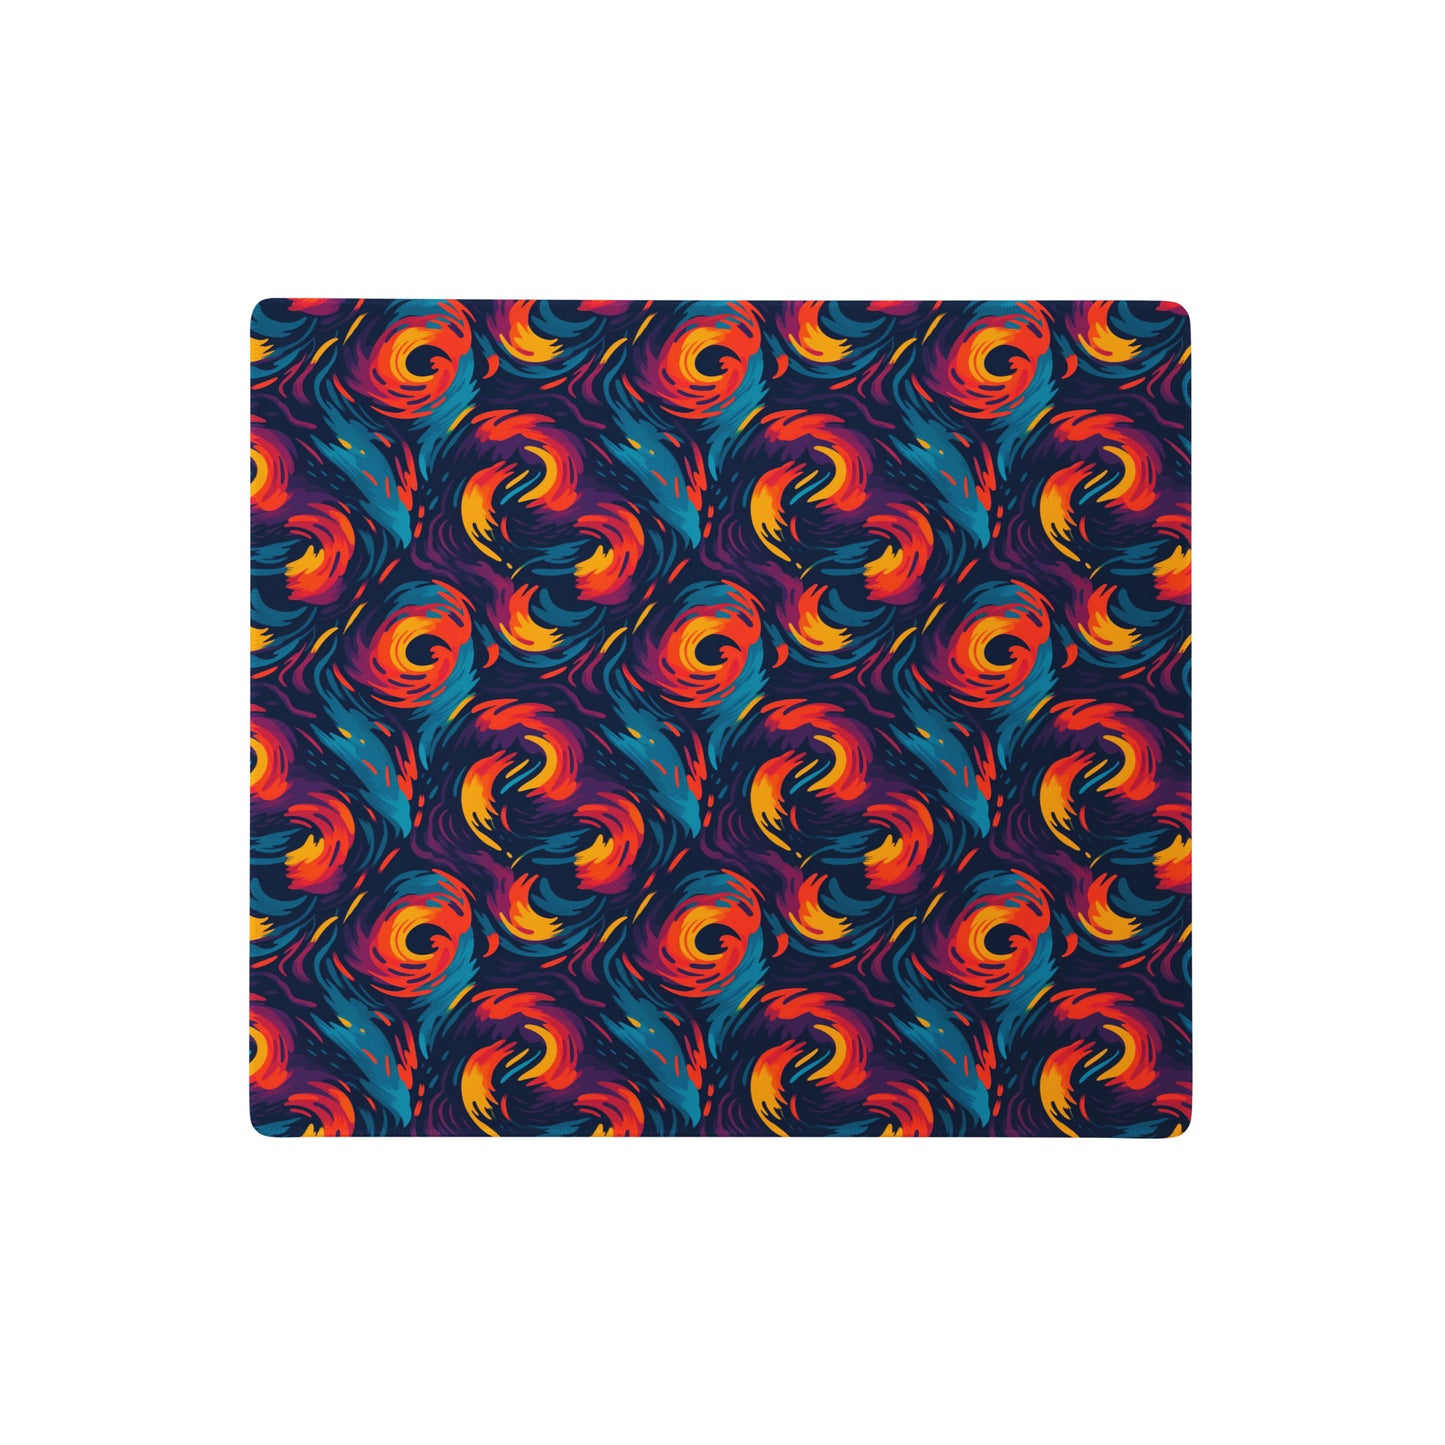 A 18" x 16" desk pad with fiery swirls on it. Red and Blue in color.